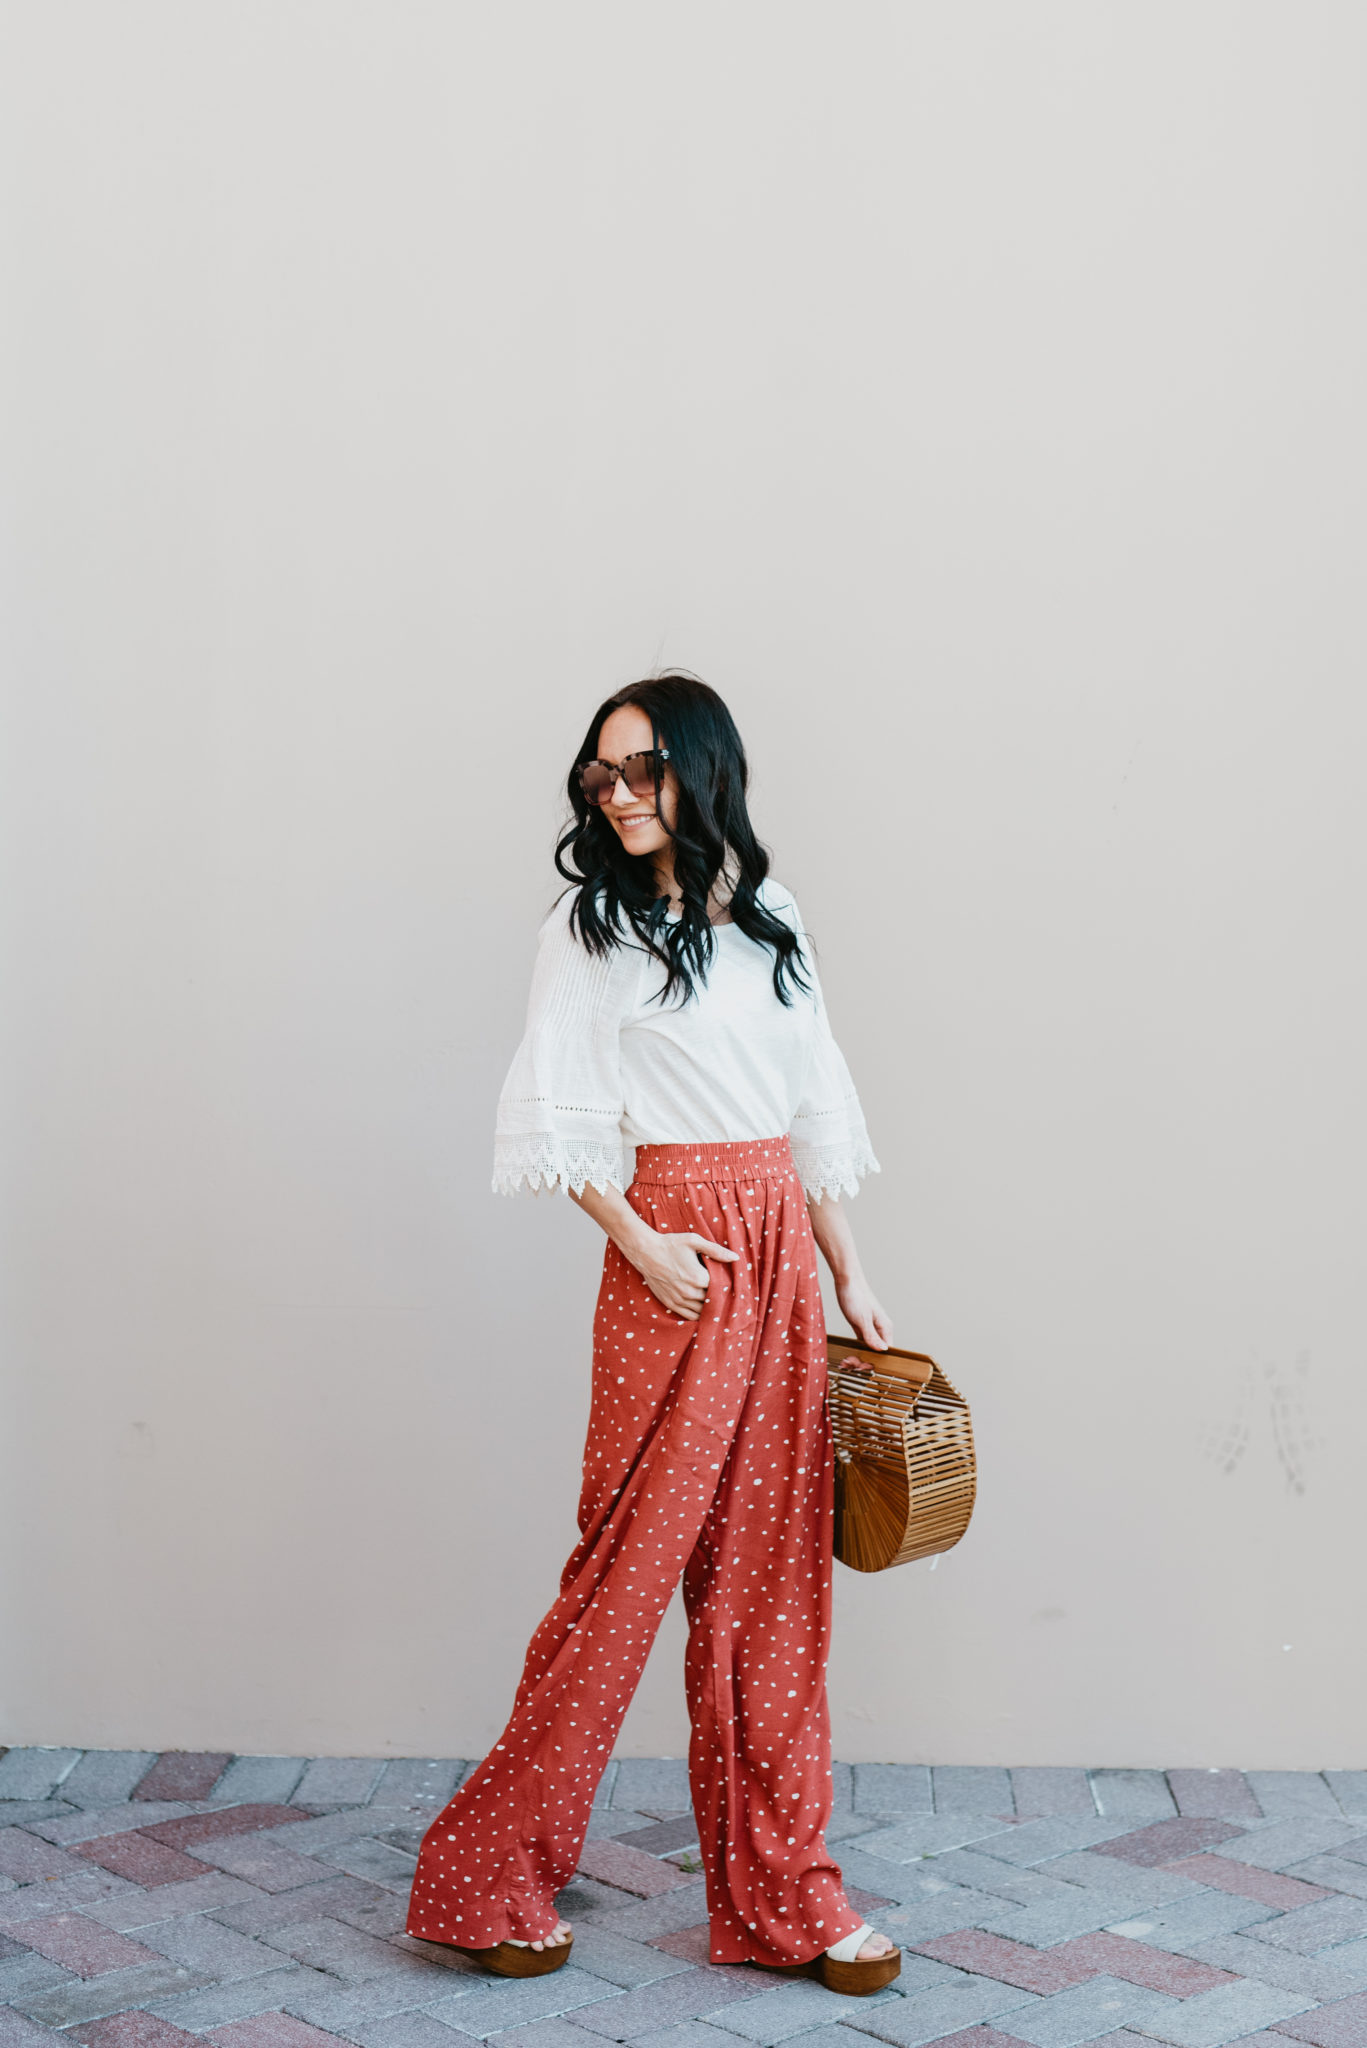 Bloggers Conference Packing List featured by top US fashion blog, Outfits and Outings: image of a woman wearing an Anthropologie eyelet top, Prima wide leg pants and Miuco bamboo handbag